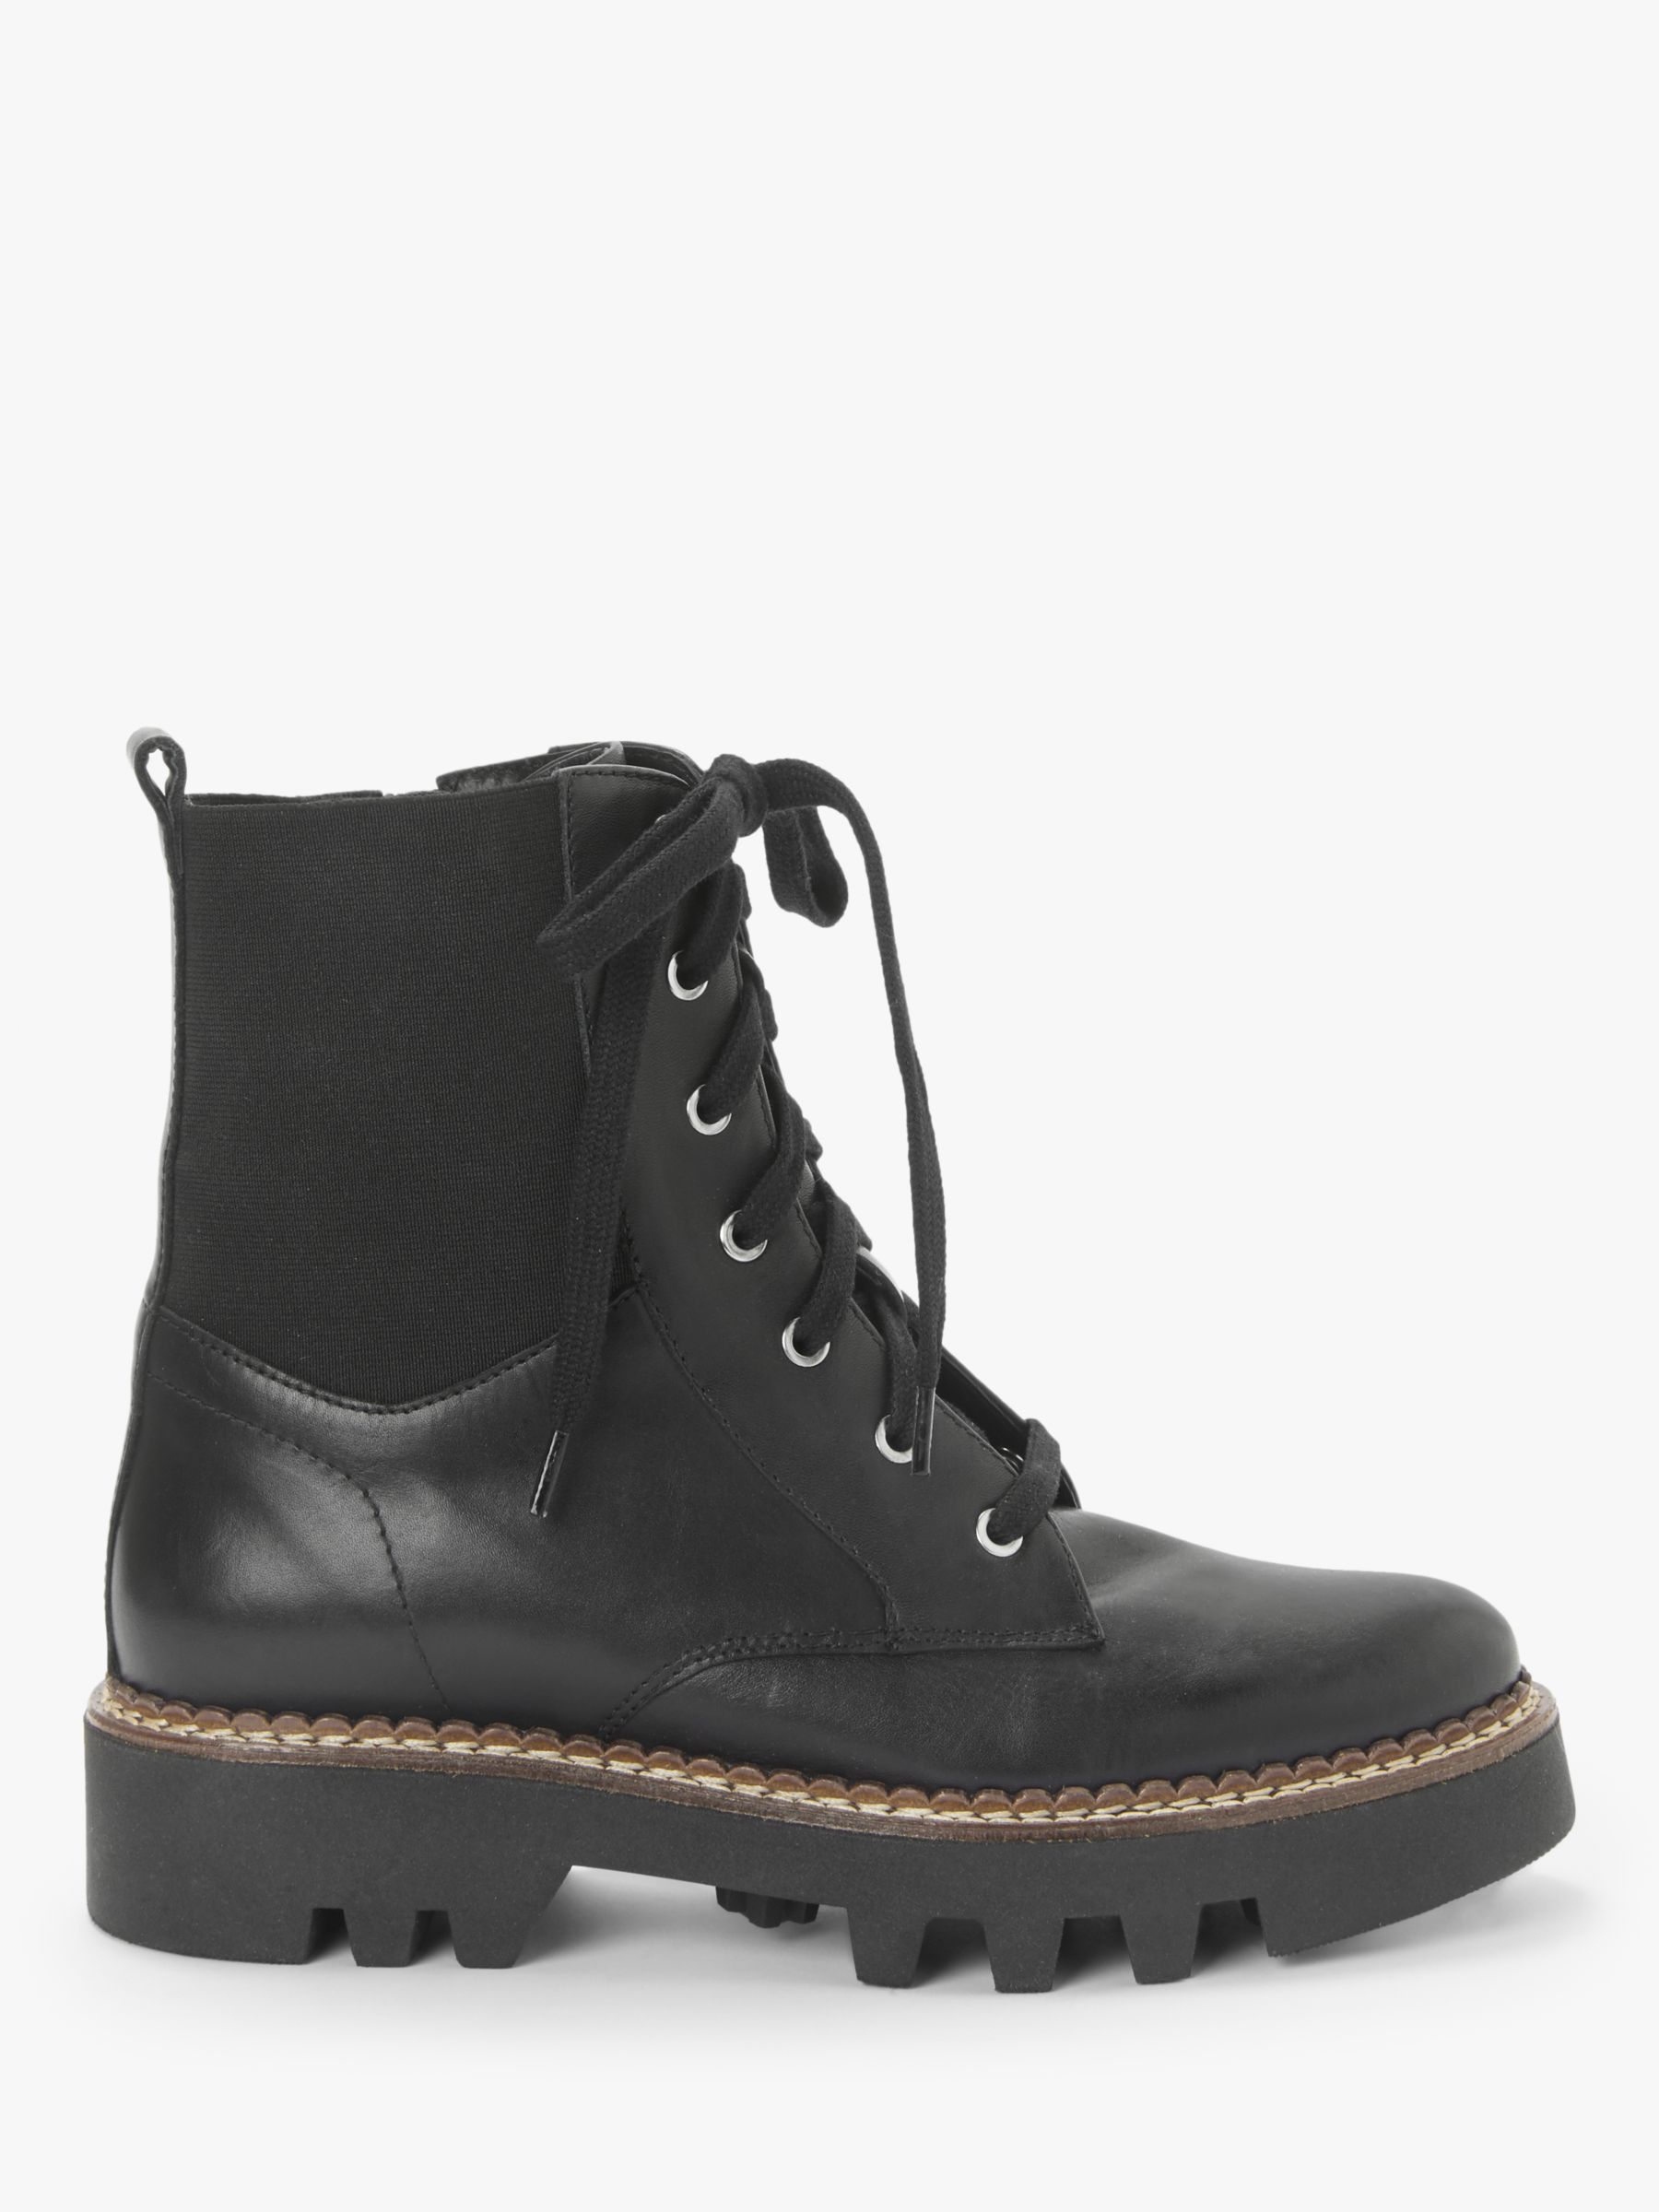 Kin Pine Leather Lace Up Chunky Boots, Black at John Lewis & Partners